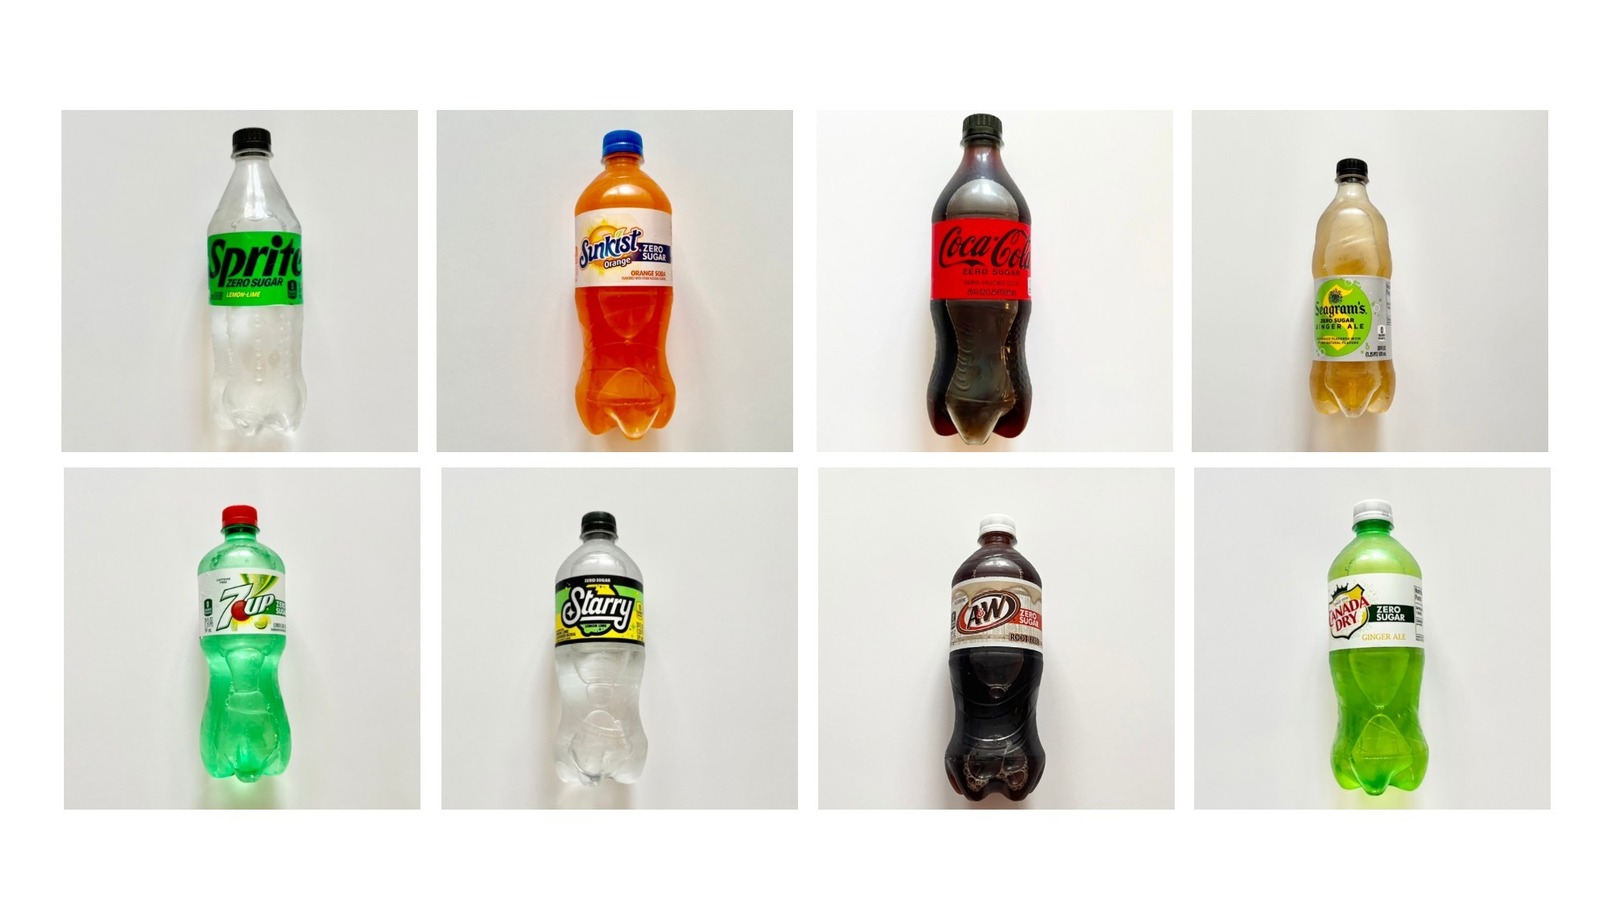 https://www.thedailymeal.com/img/gallery/the-13-best-sugar-free-sodas-ranked/l-intro-1682705411.jpg